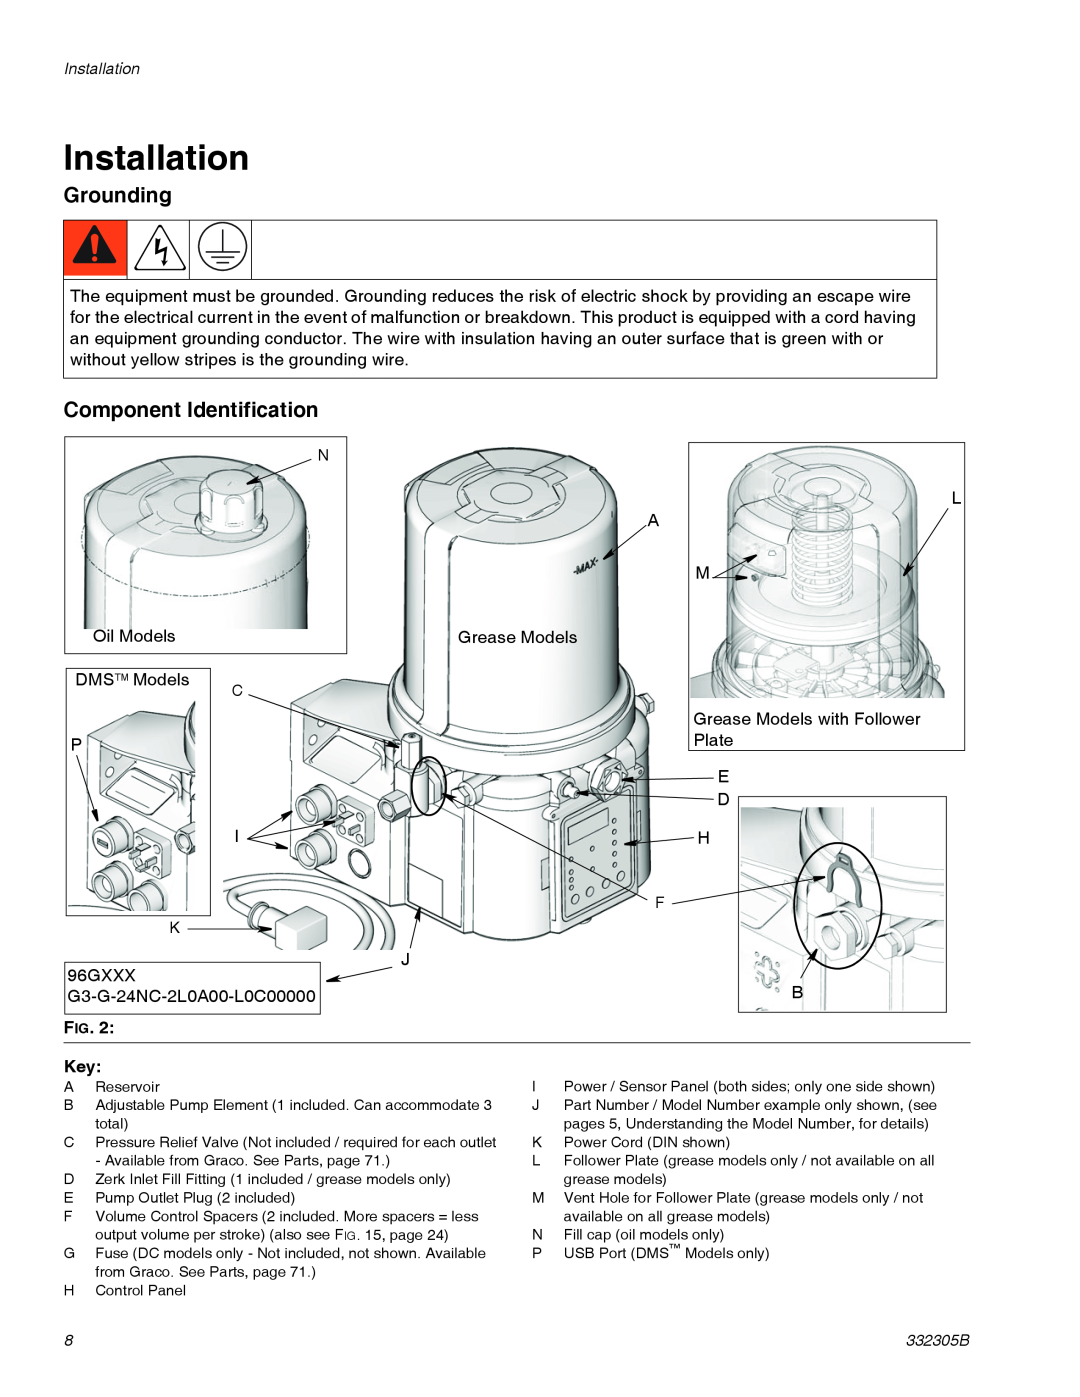 Graco 332305B important safety instructions Installation, Grounding, Component Identification 